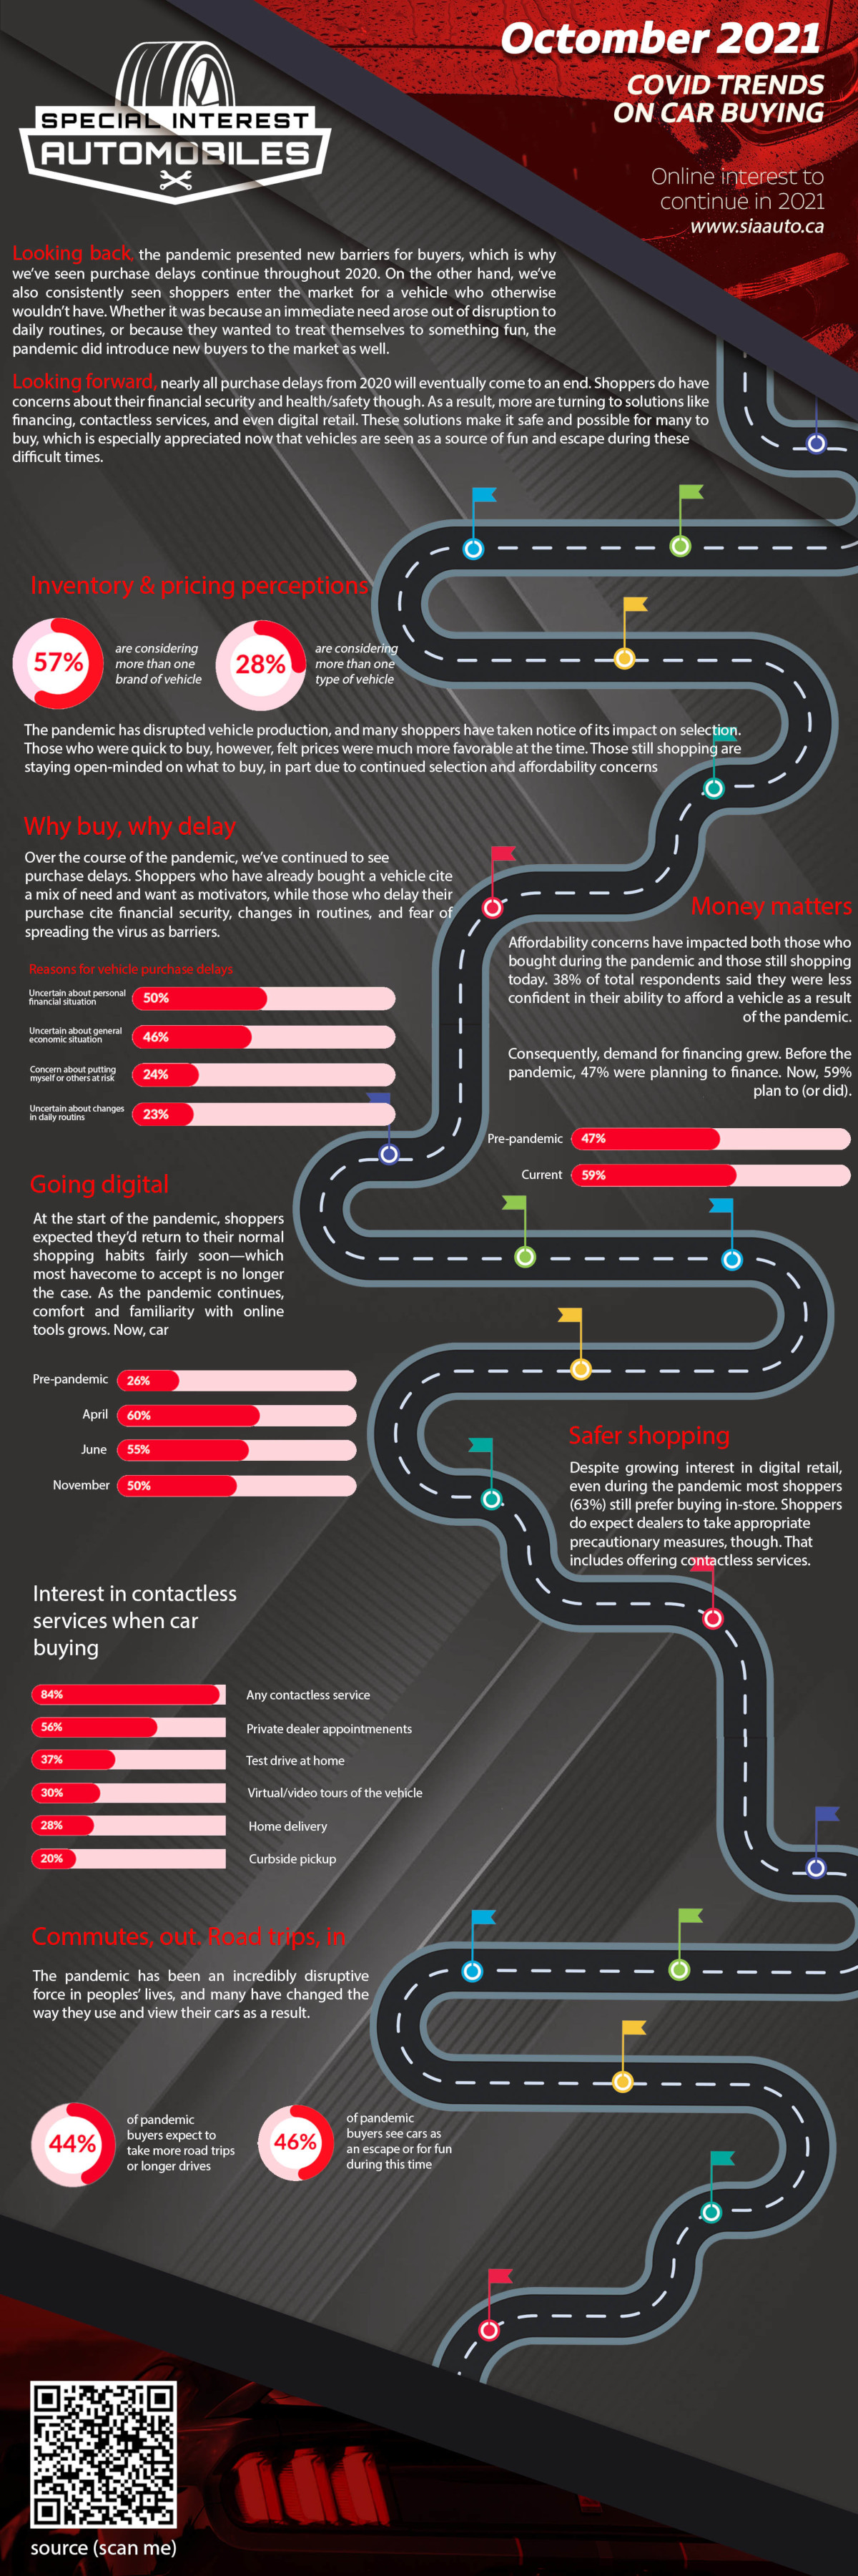 COVID trends on car buying Infographic Cambridge